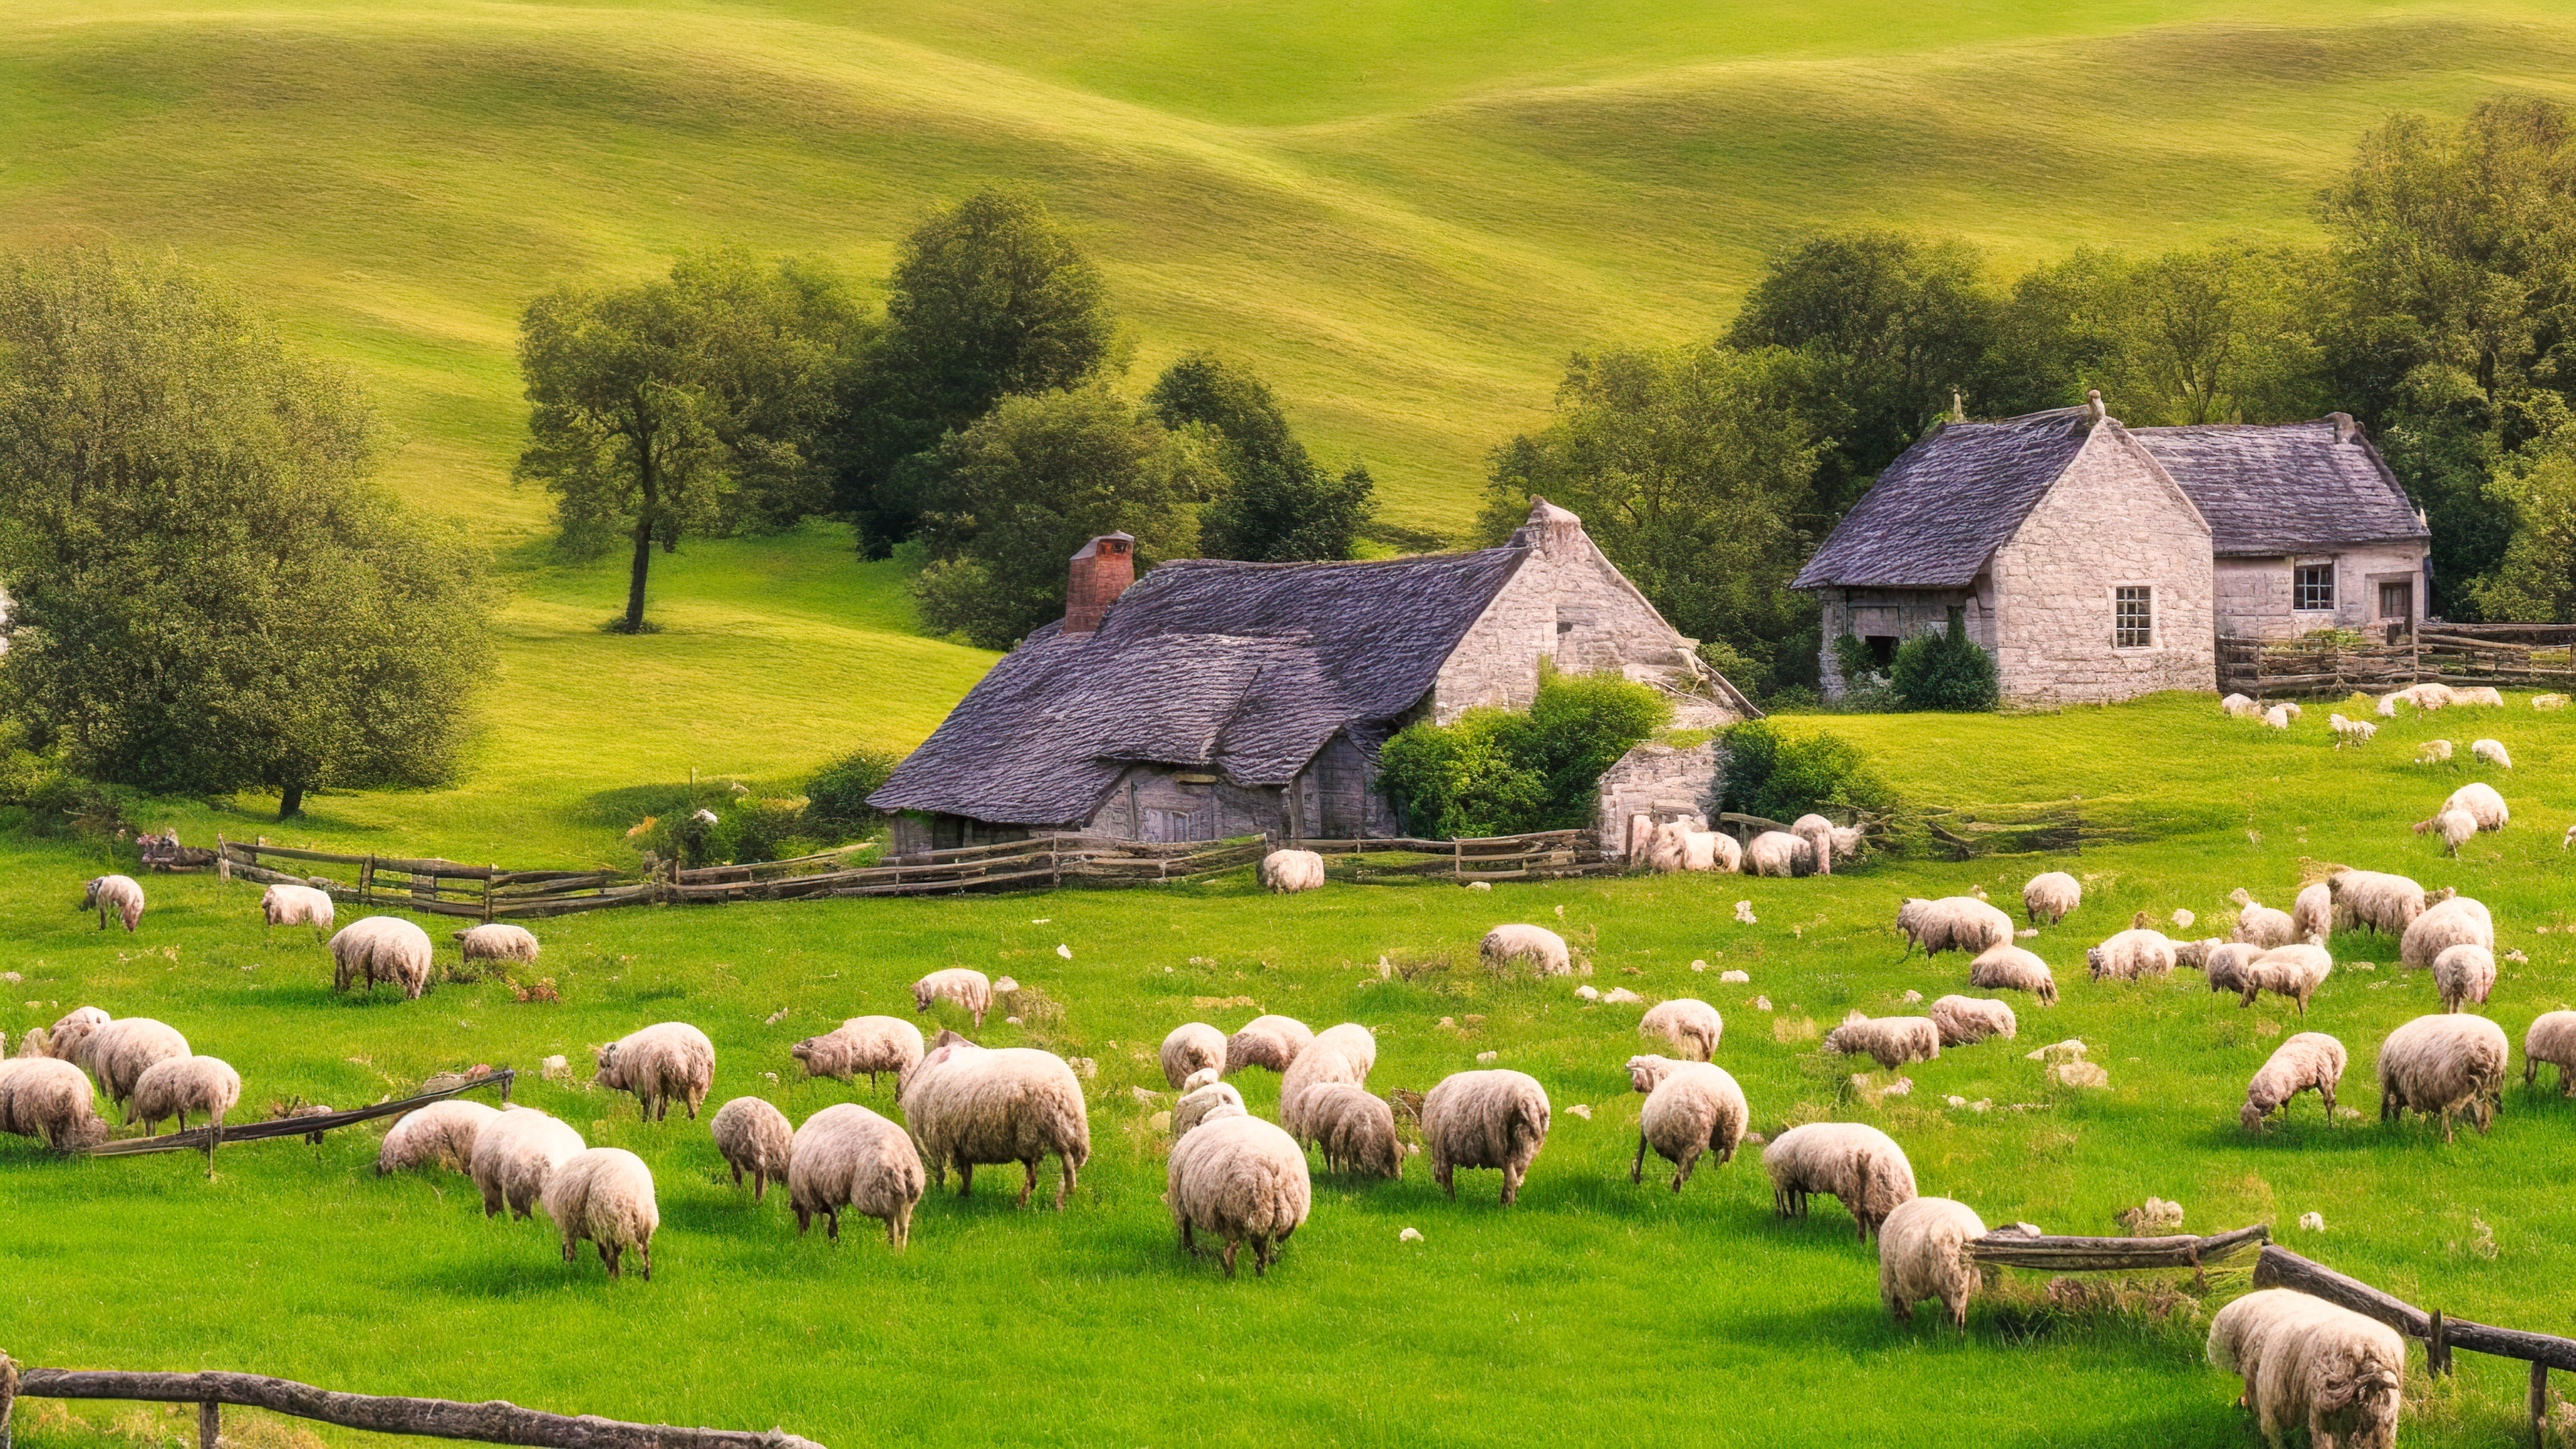 Step into the tranquility of a peaceful countryside cottage nestled among rolling hills, surrounded by sheep grazing, with our 4K nature wallpaper for your laptop.